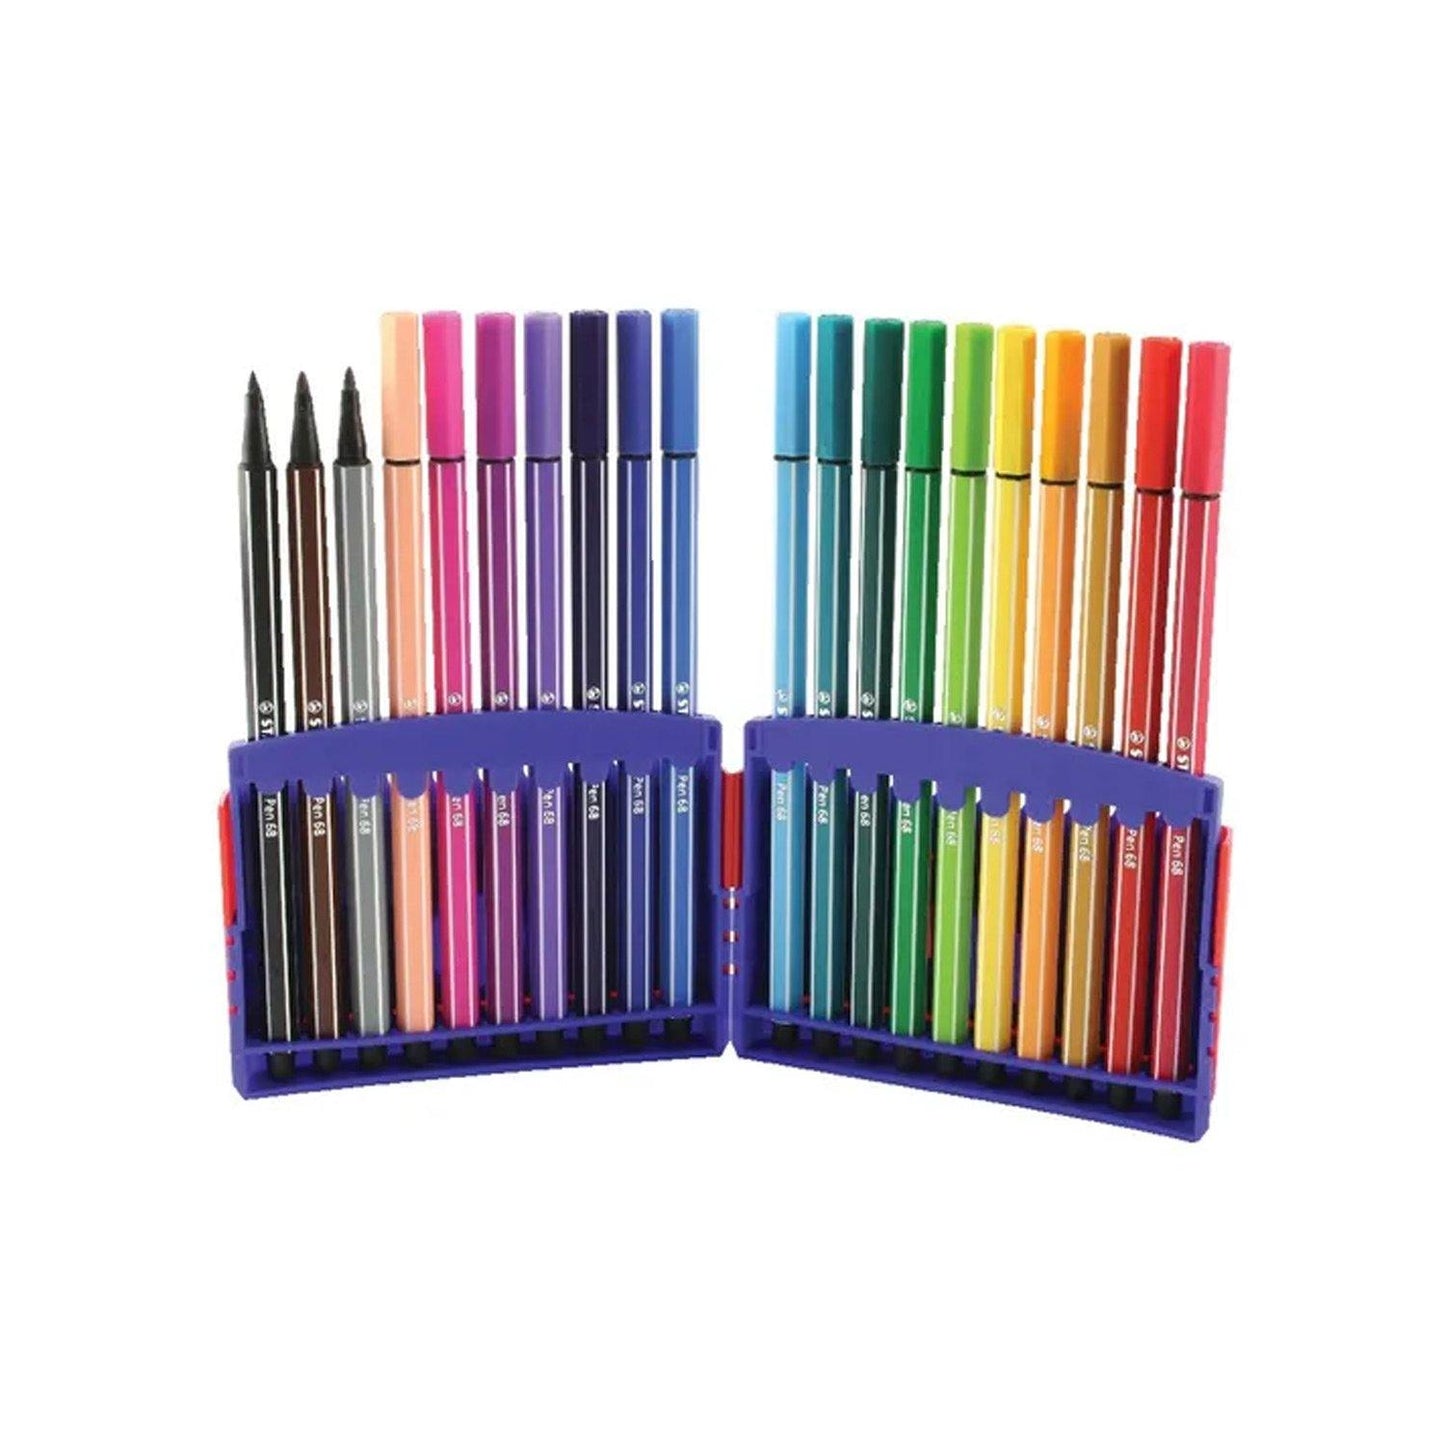 Stabilo Assorted Pen 68 ColorParade Fibre Tip Pens Pack of 20